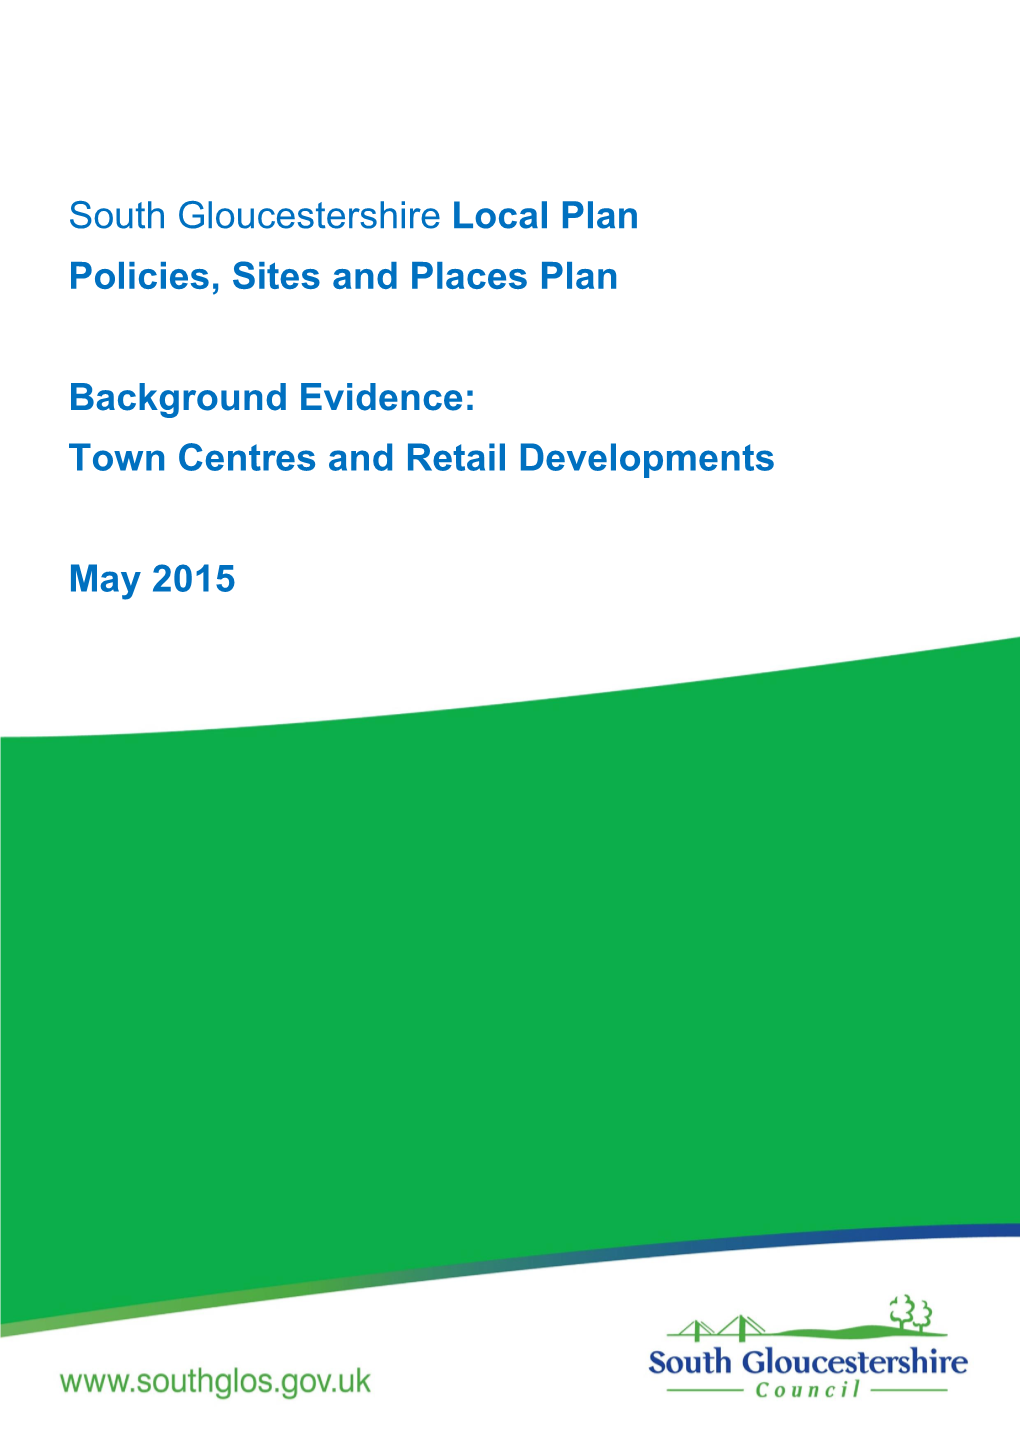 South Gloucestershire Local Plan Policies, Sites and Places Plan